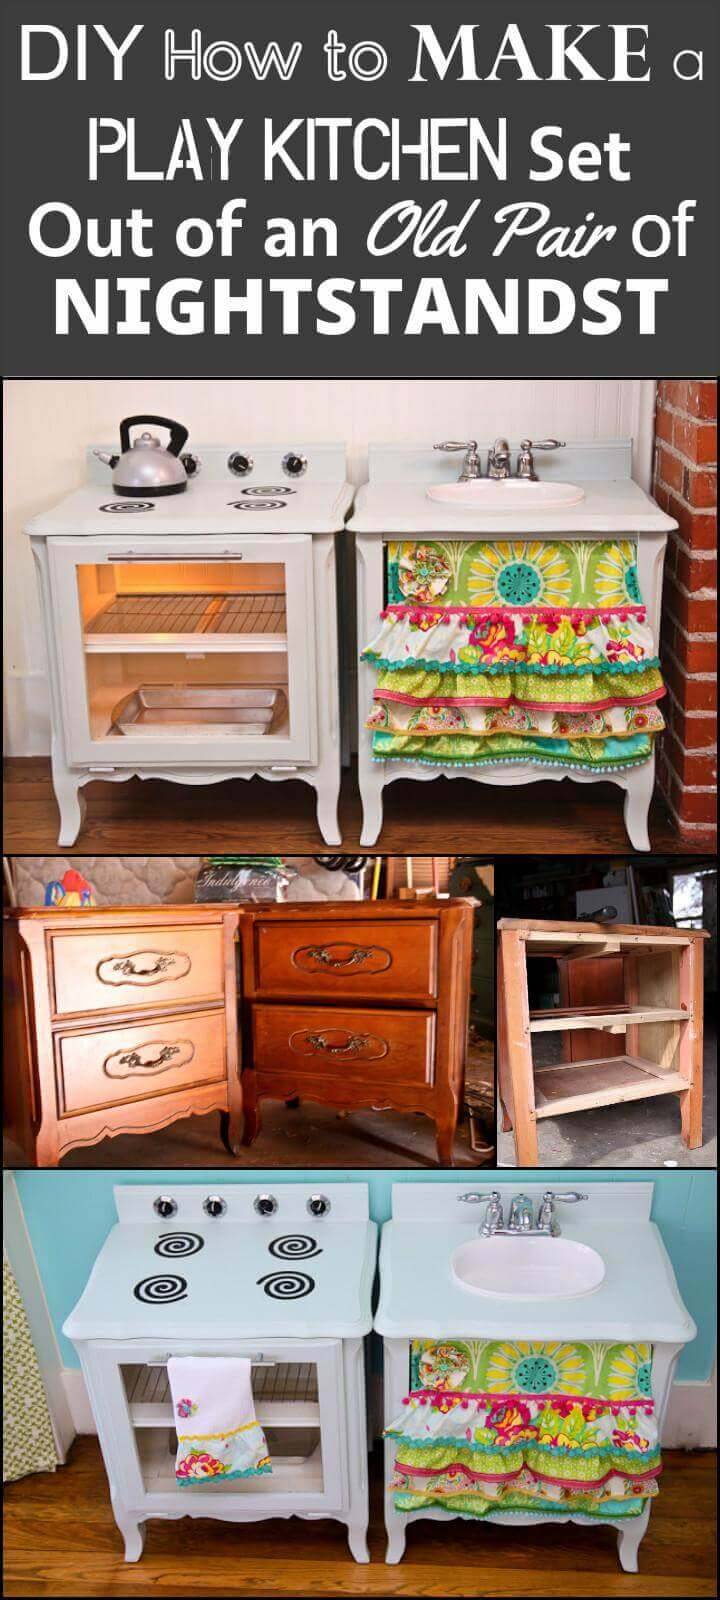 DIY repurposed old nightstand into play kitchen